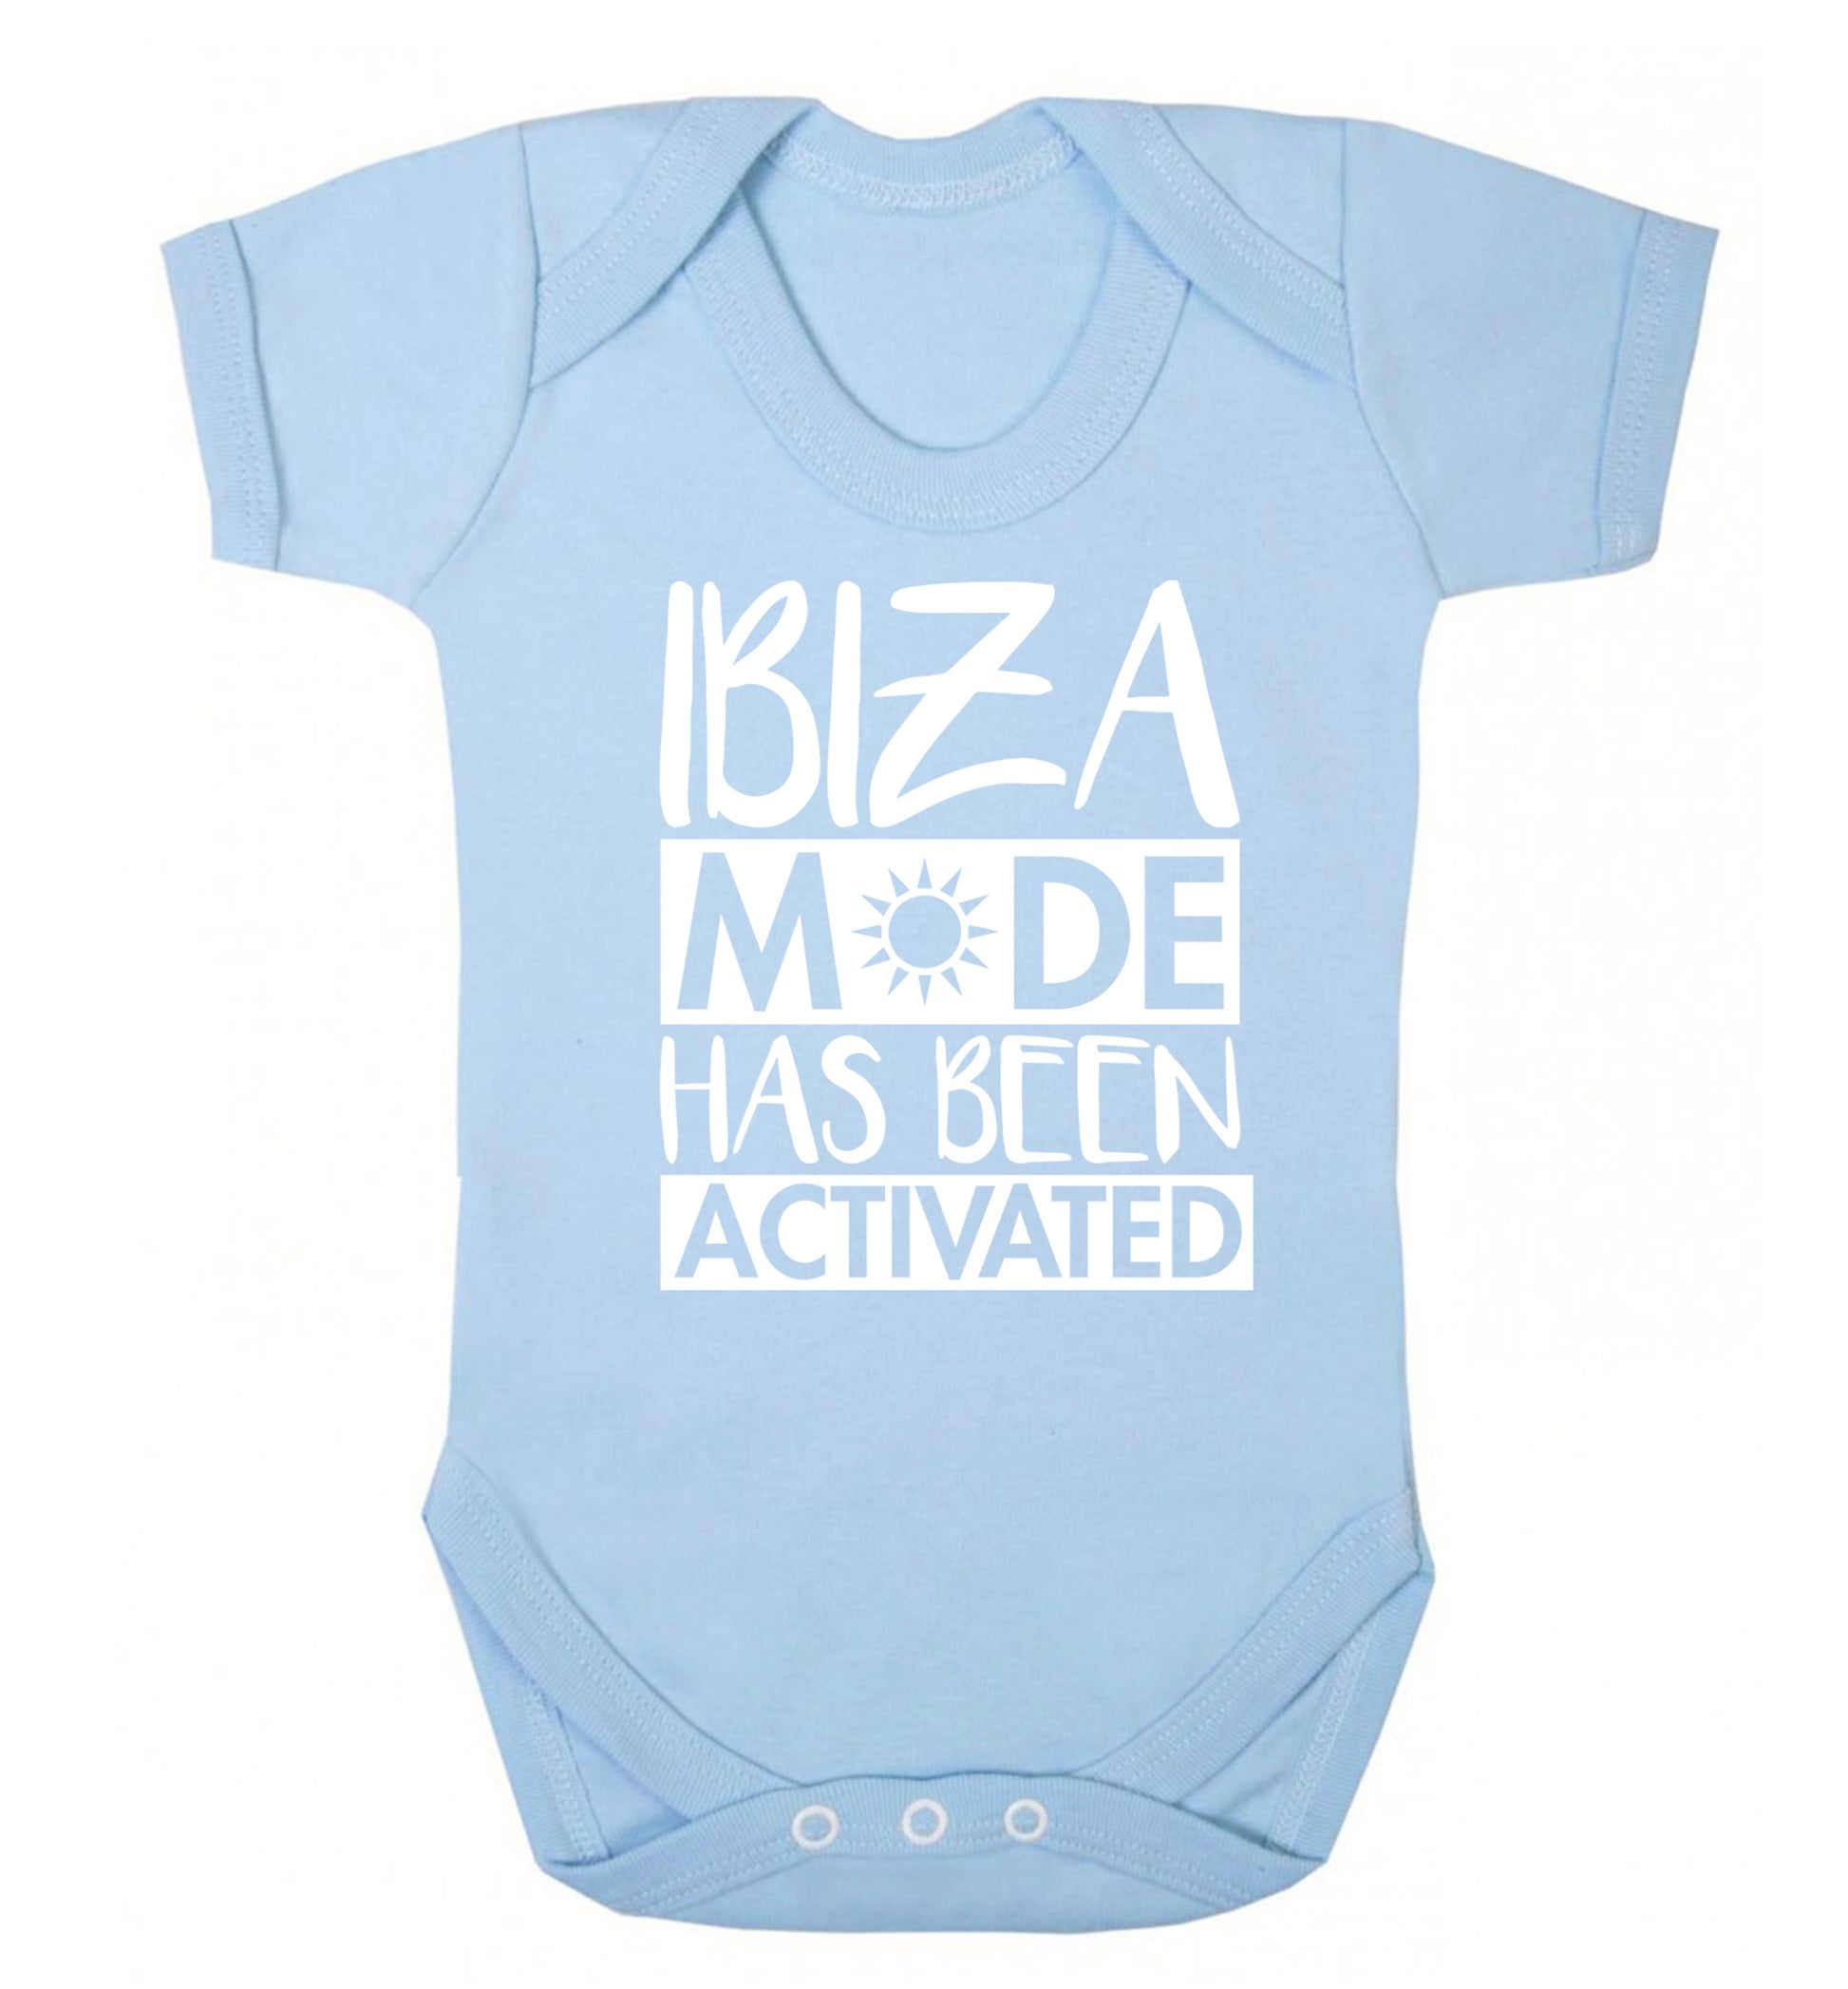 Ibiza mode has been activated Baby Vest pale blue 18-24 months